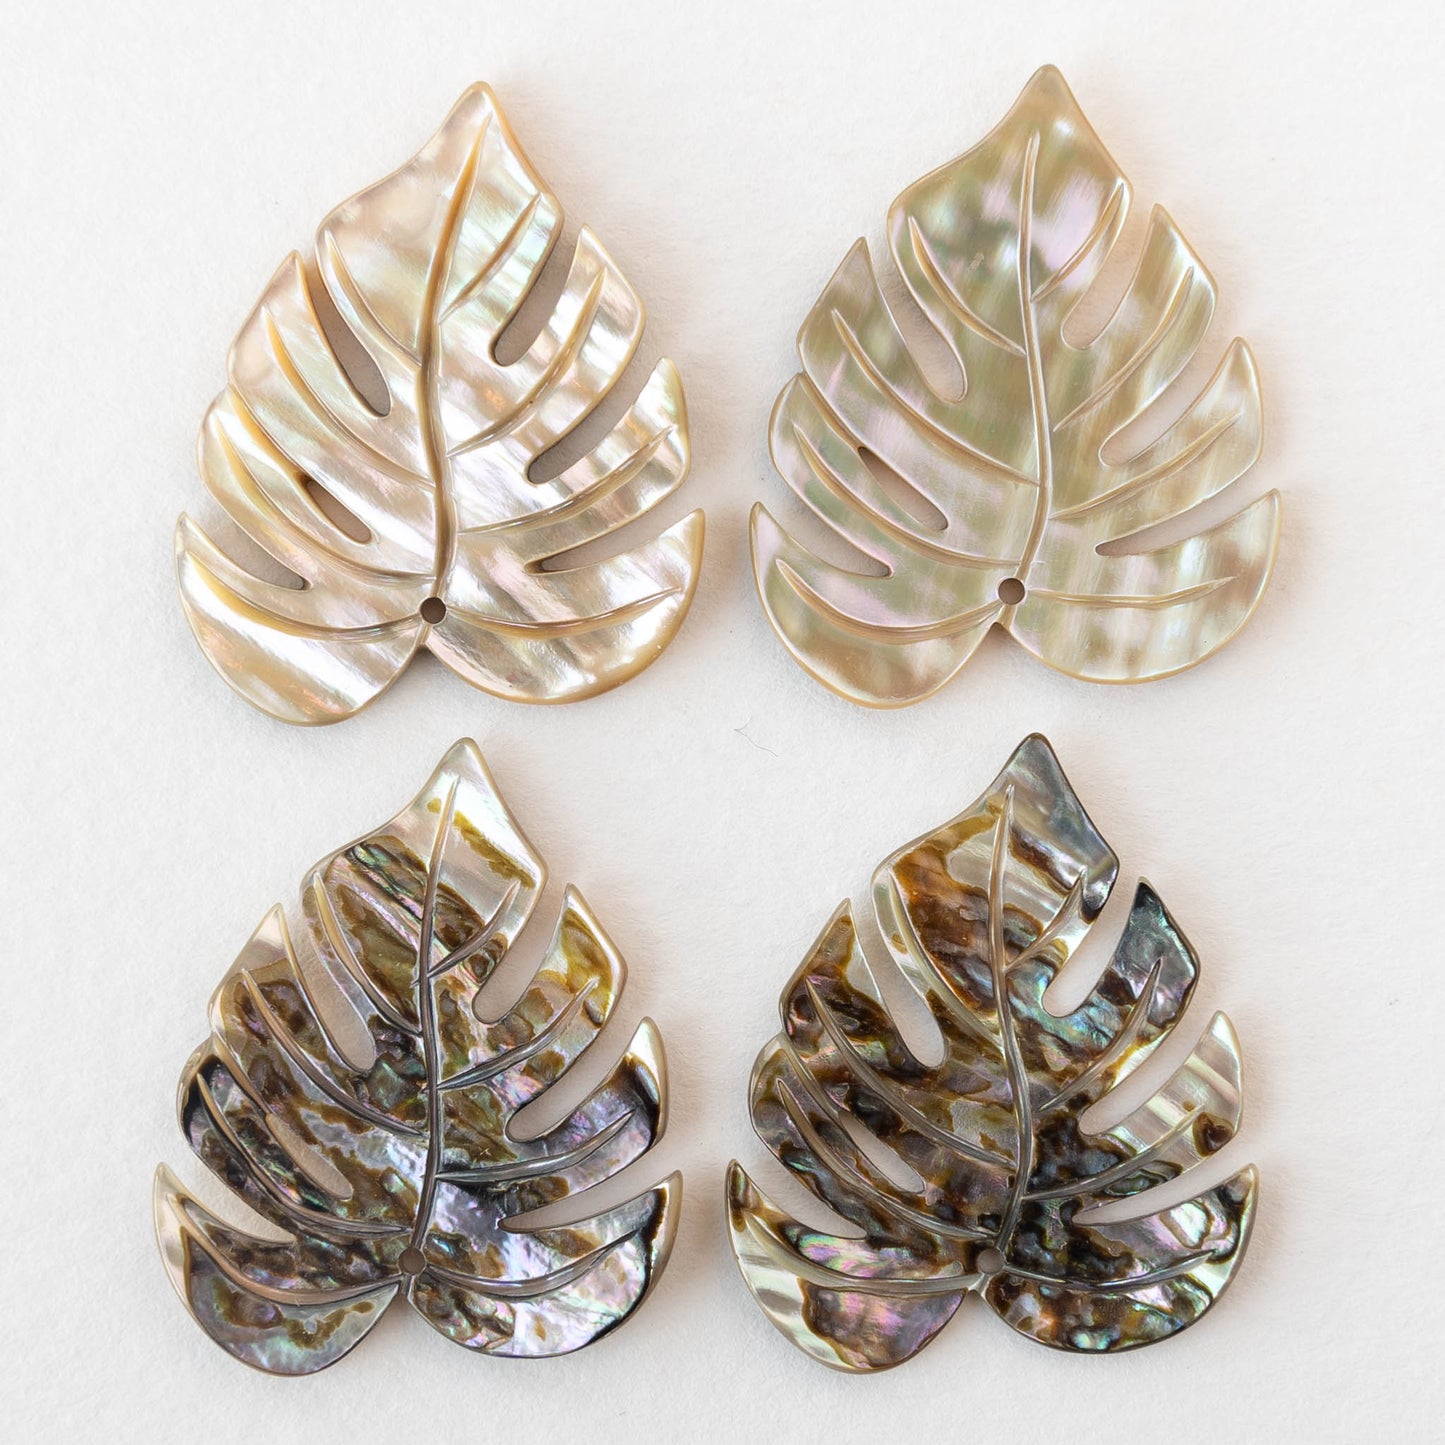 24x30mm Carved Abalone Monstera Leaf Shell Beads - 1 Pair